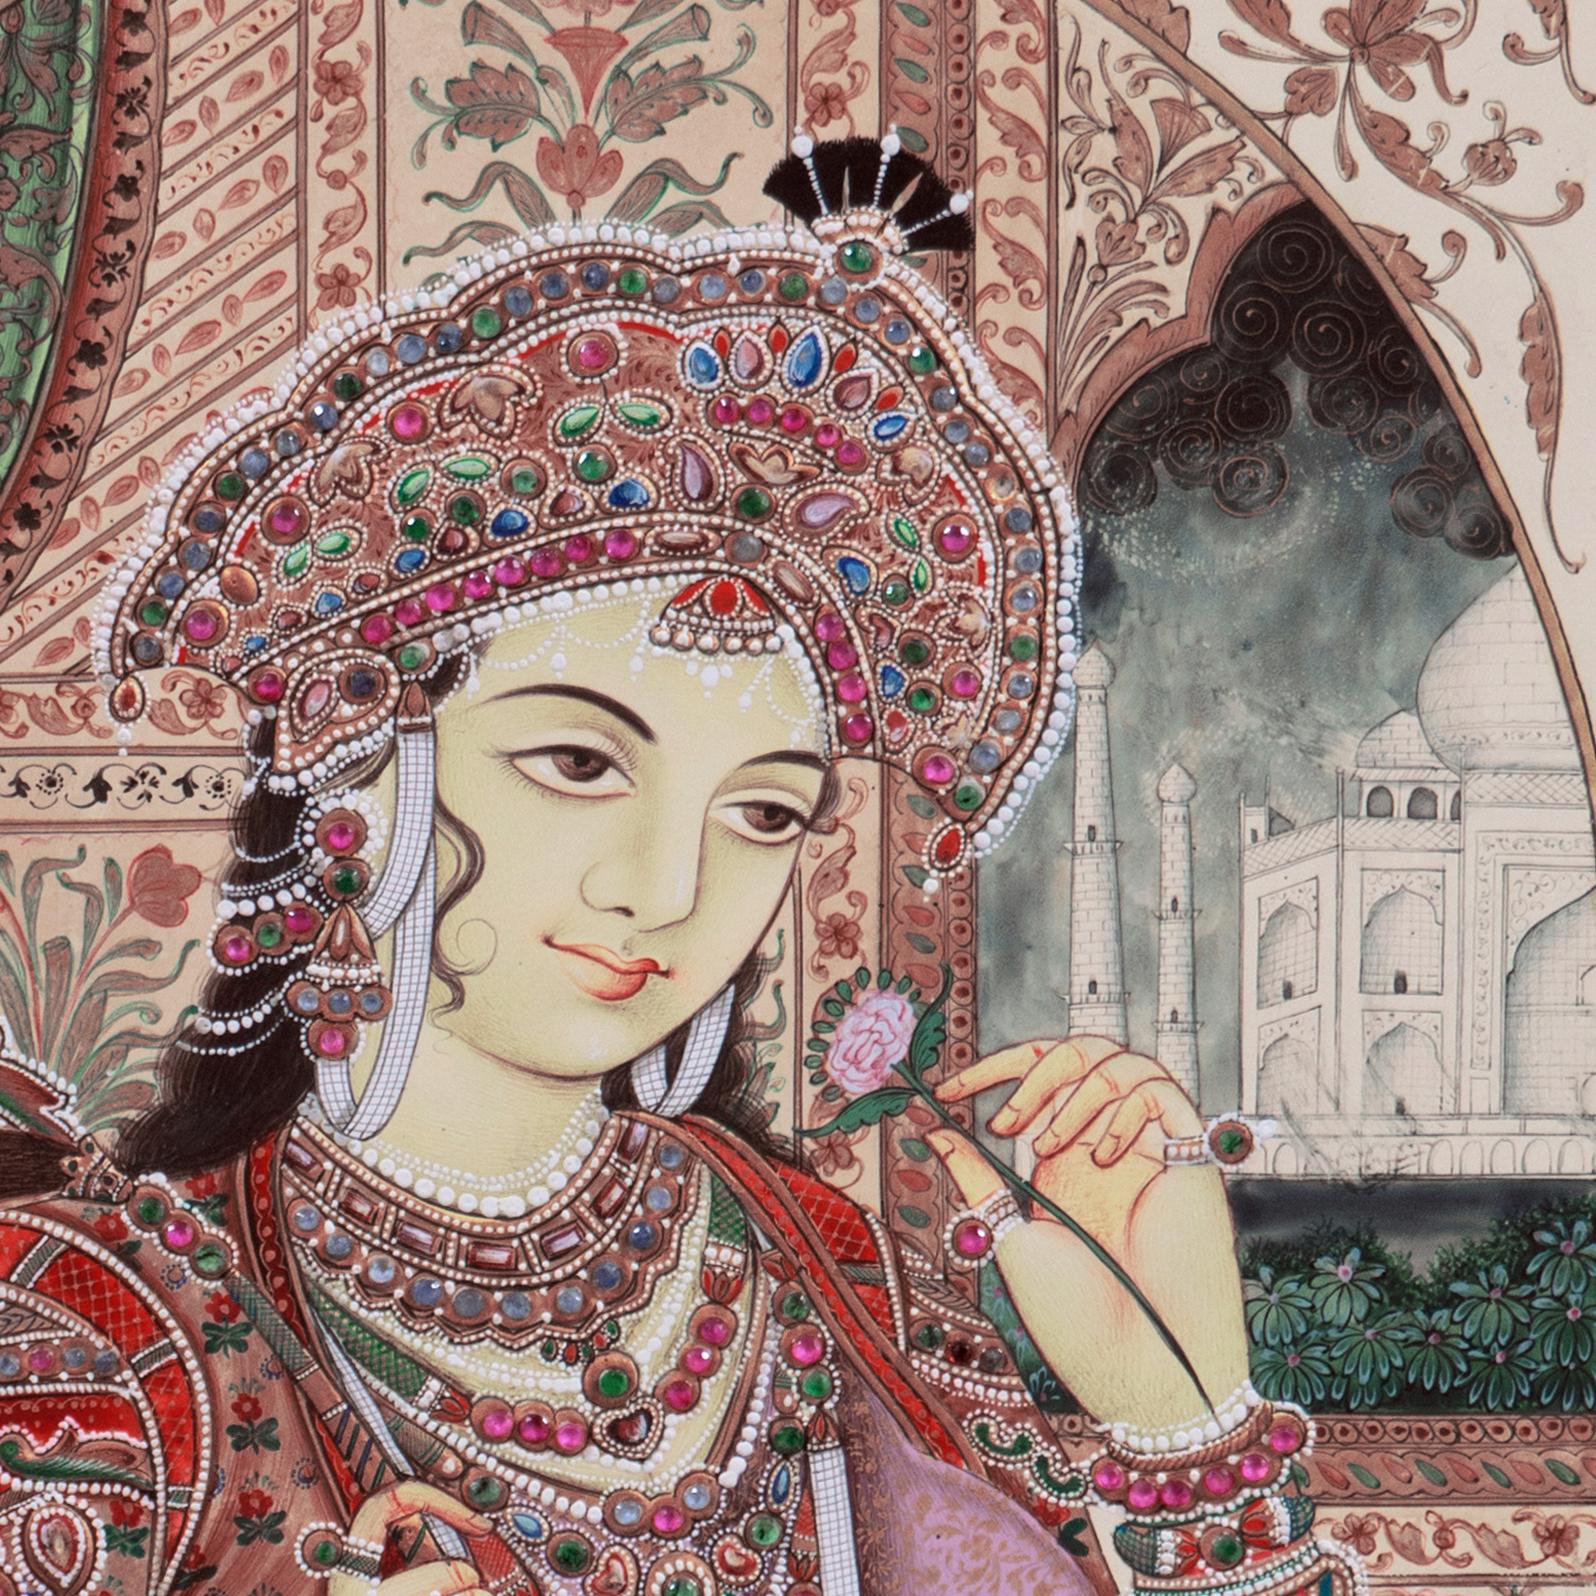 Signed lower right, 'Babu Lal' for Babu Lal Marotia (Indian, born 1961) and painted circa 1995.

A double portrait of Shah Jahan and his most favored wife, Mumtaz Mahal, exquisitely detailed and embellished with colored rhinestones. The two